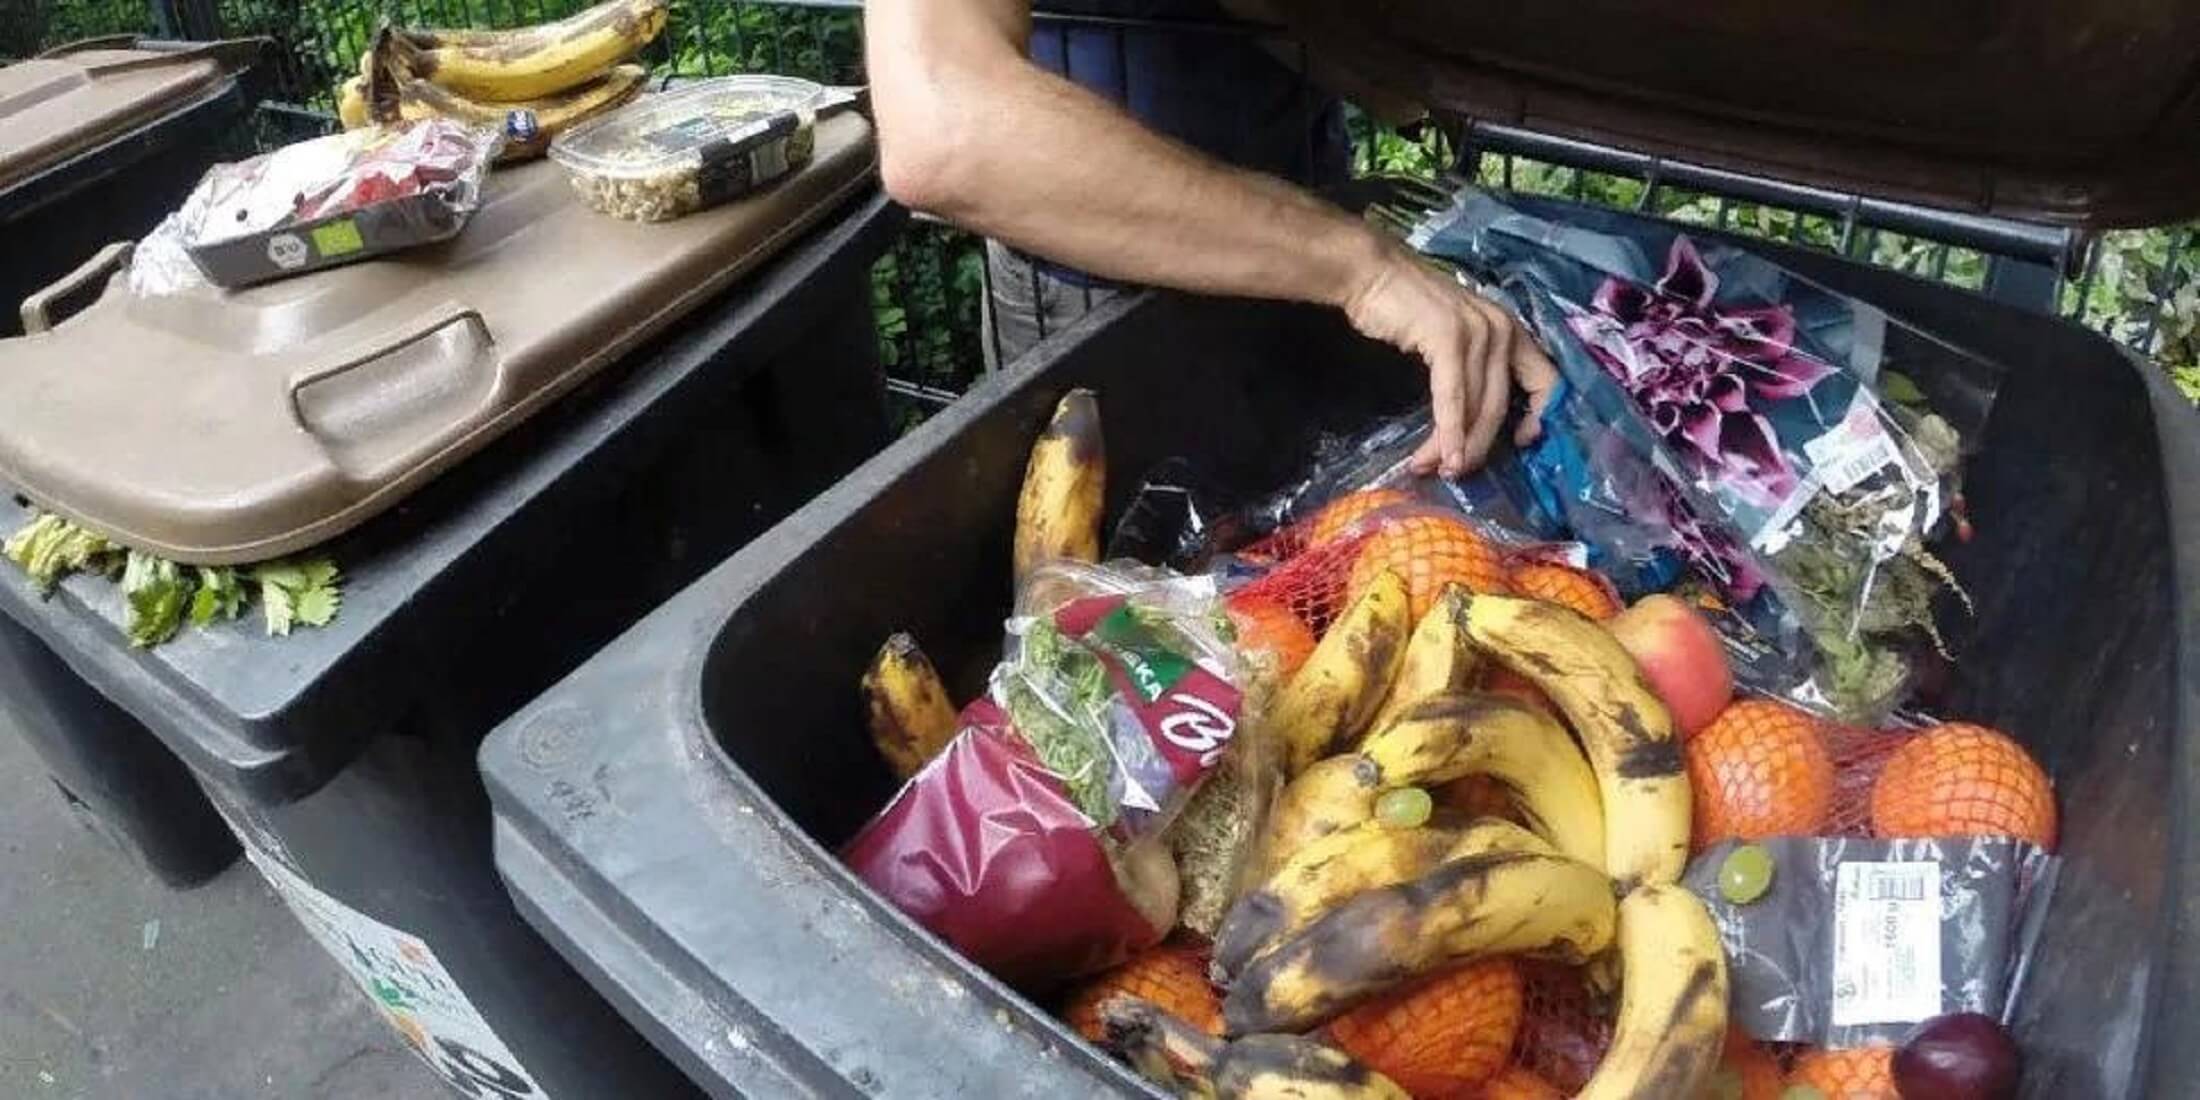 How much food thrown out by people?